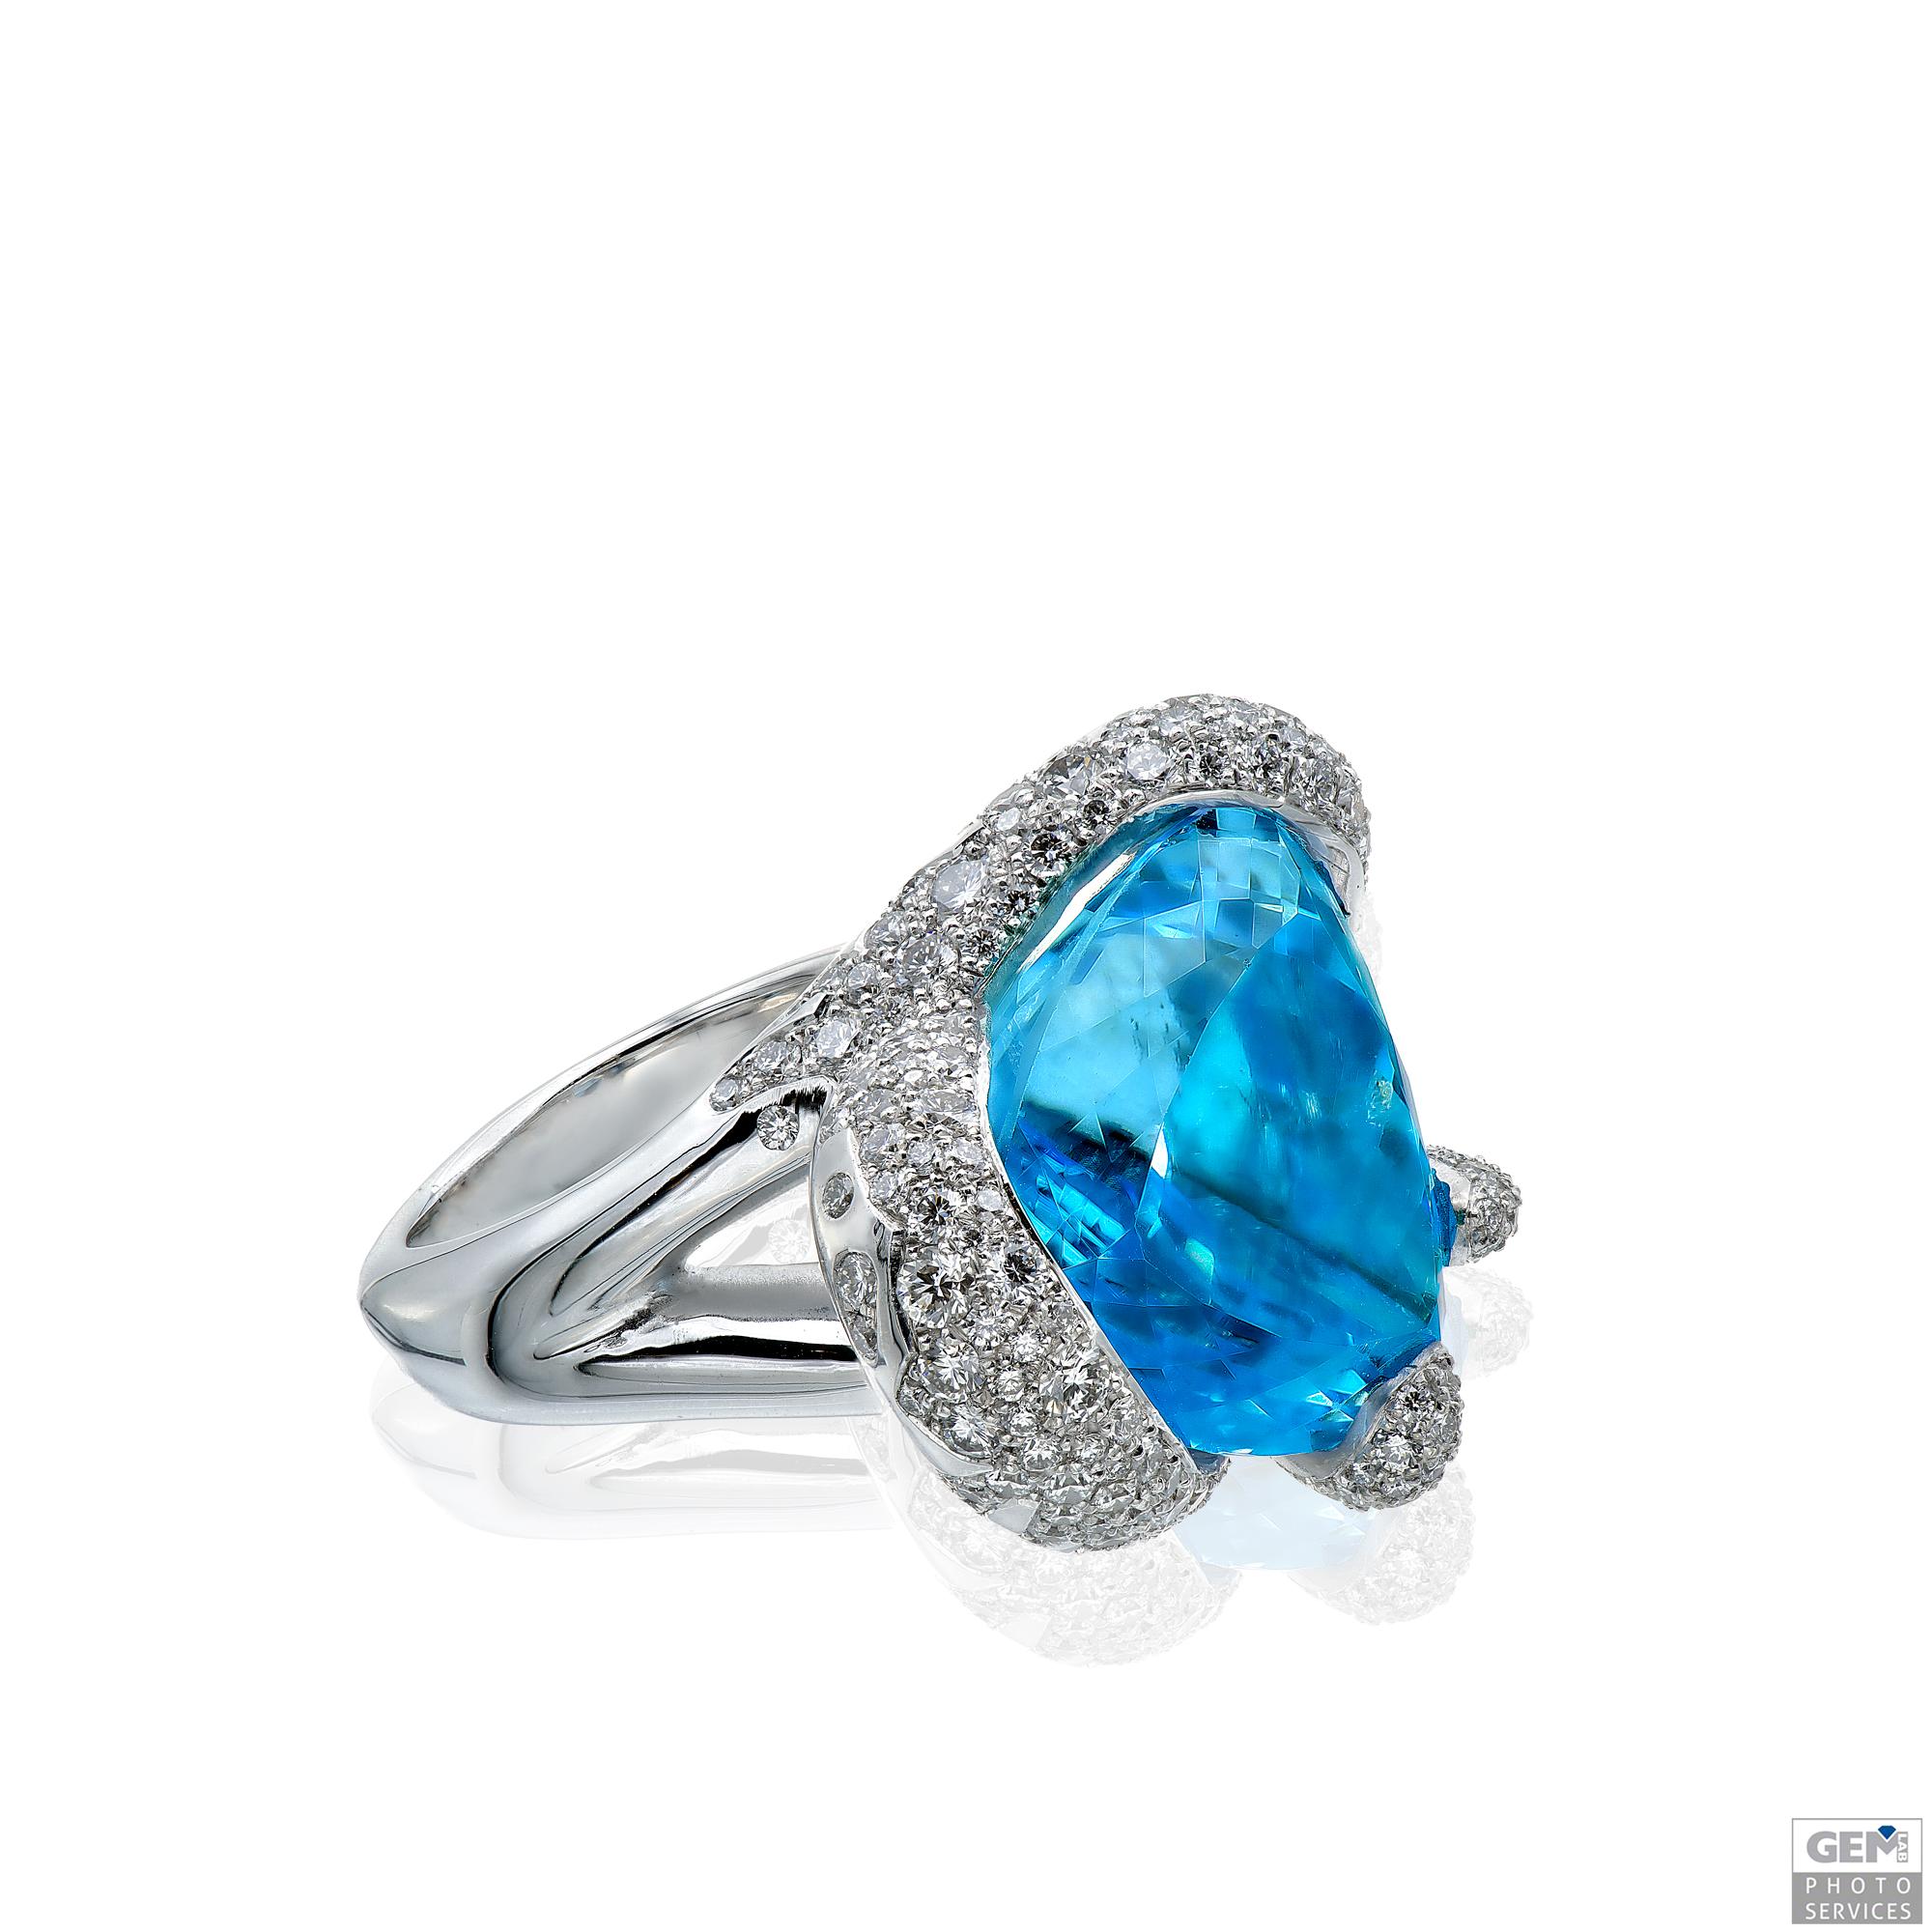 This bold Carigi design boasts an amazing trillion cut light blue 30,59ct Topaz centerstone. The blue Topaz sparkles in an 18k white golden ring, set with small diamonds for a total of 2,75ct. The design was created and based upon big tentacles